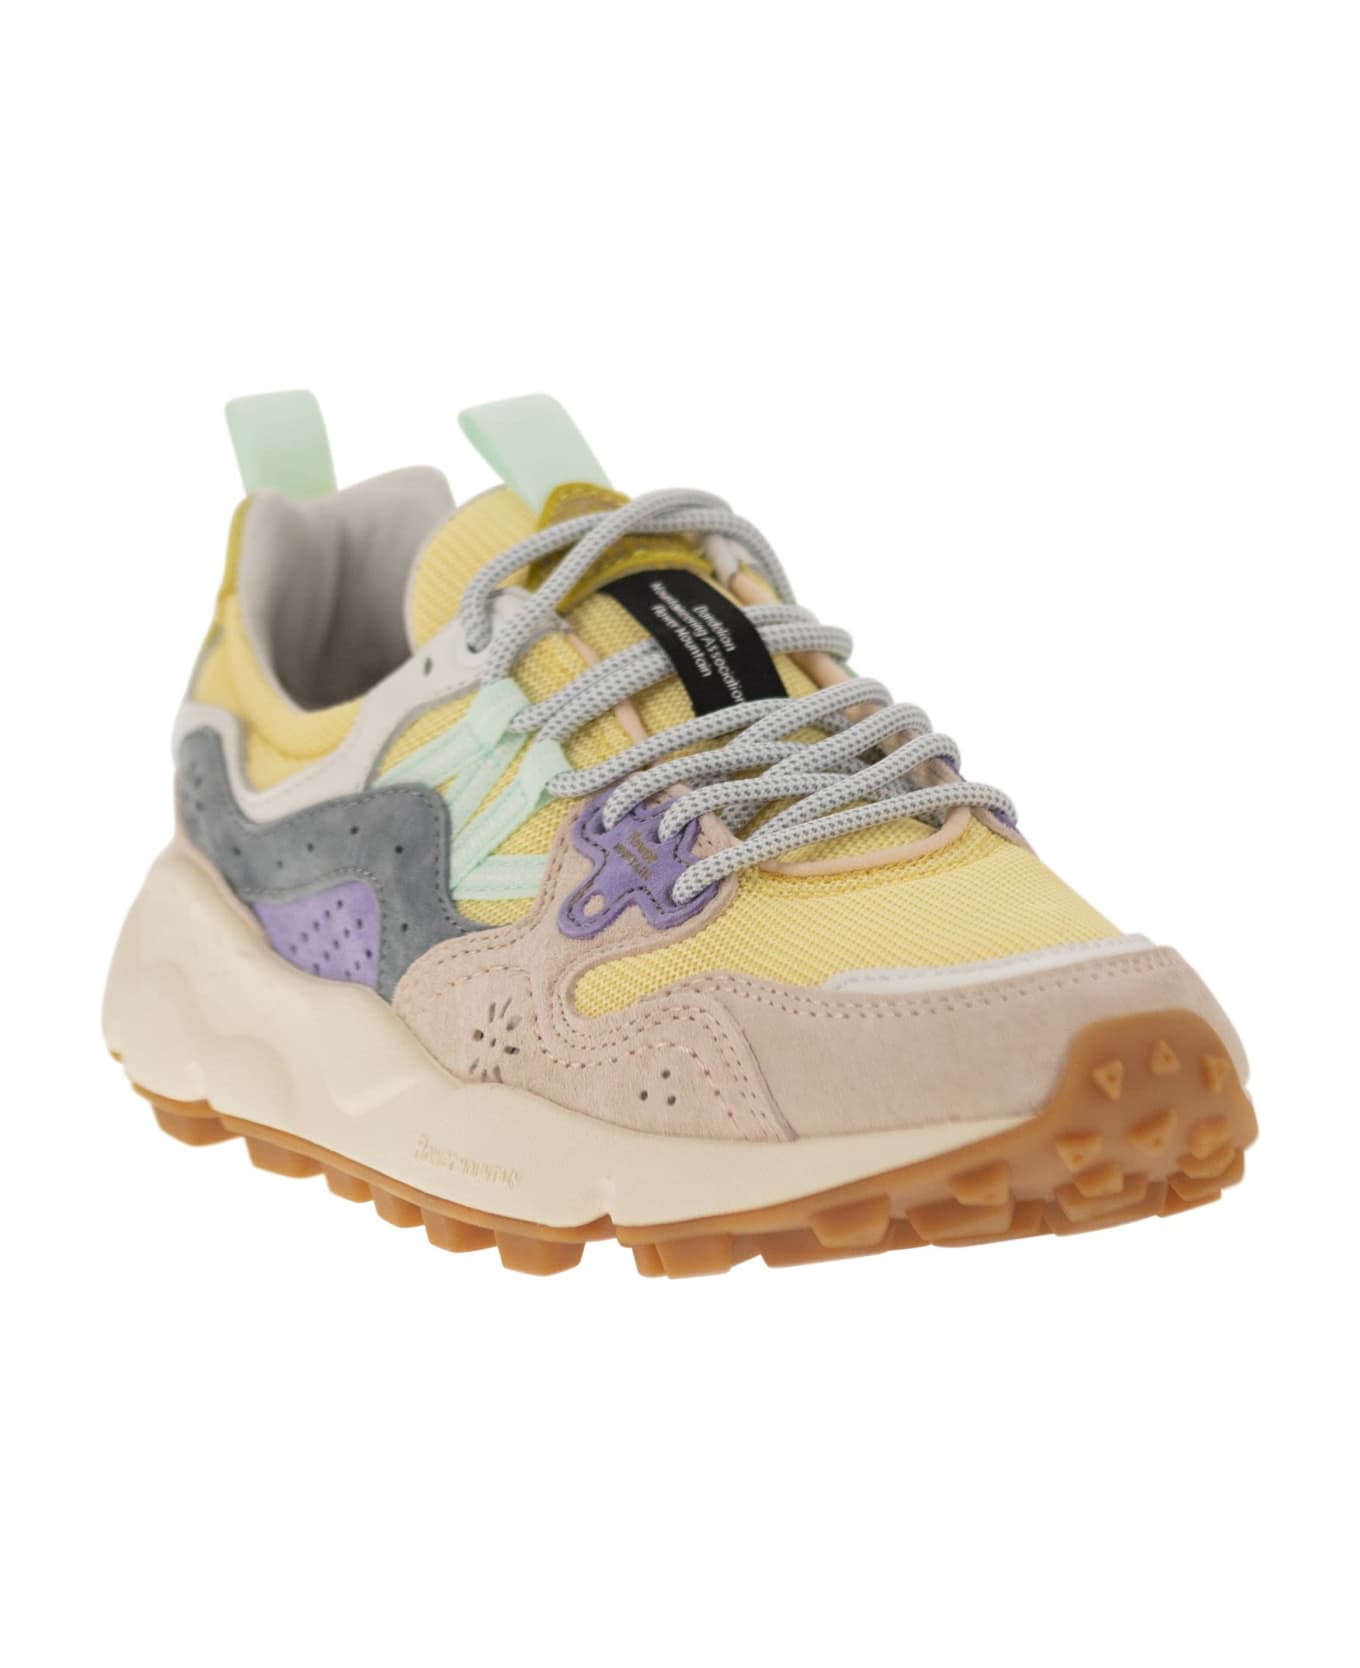 Flower Mountain Yamano 3 - Sneakers - Pink